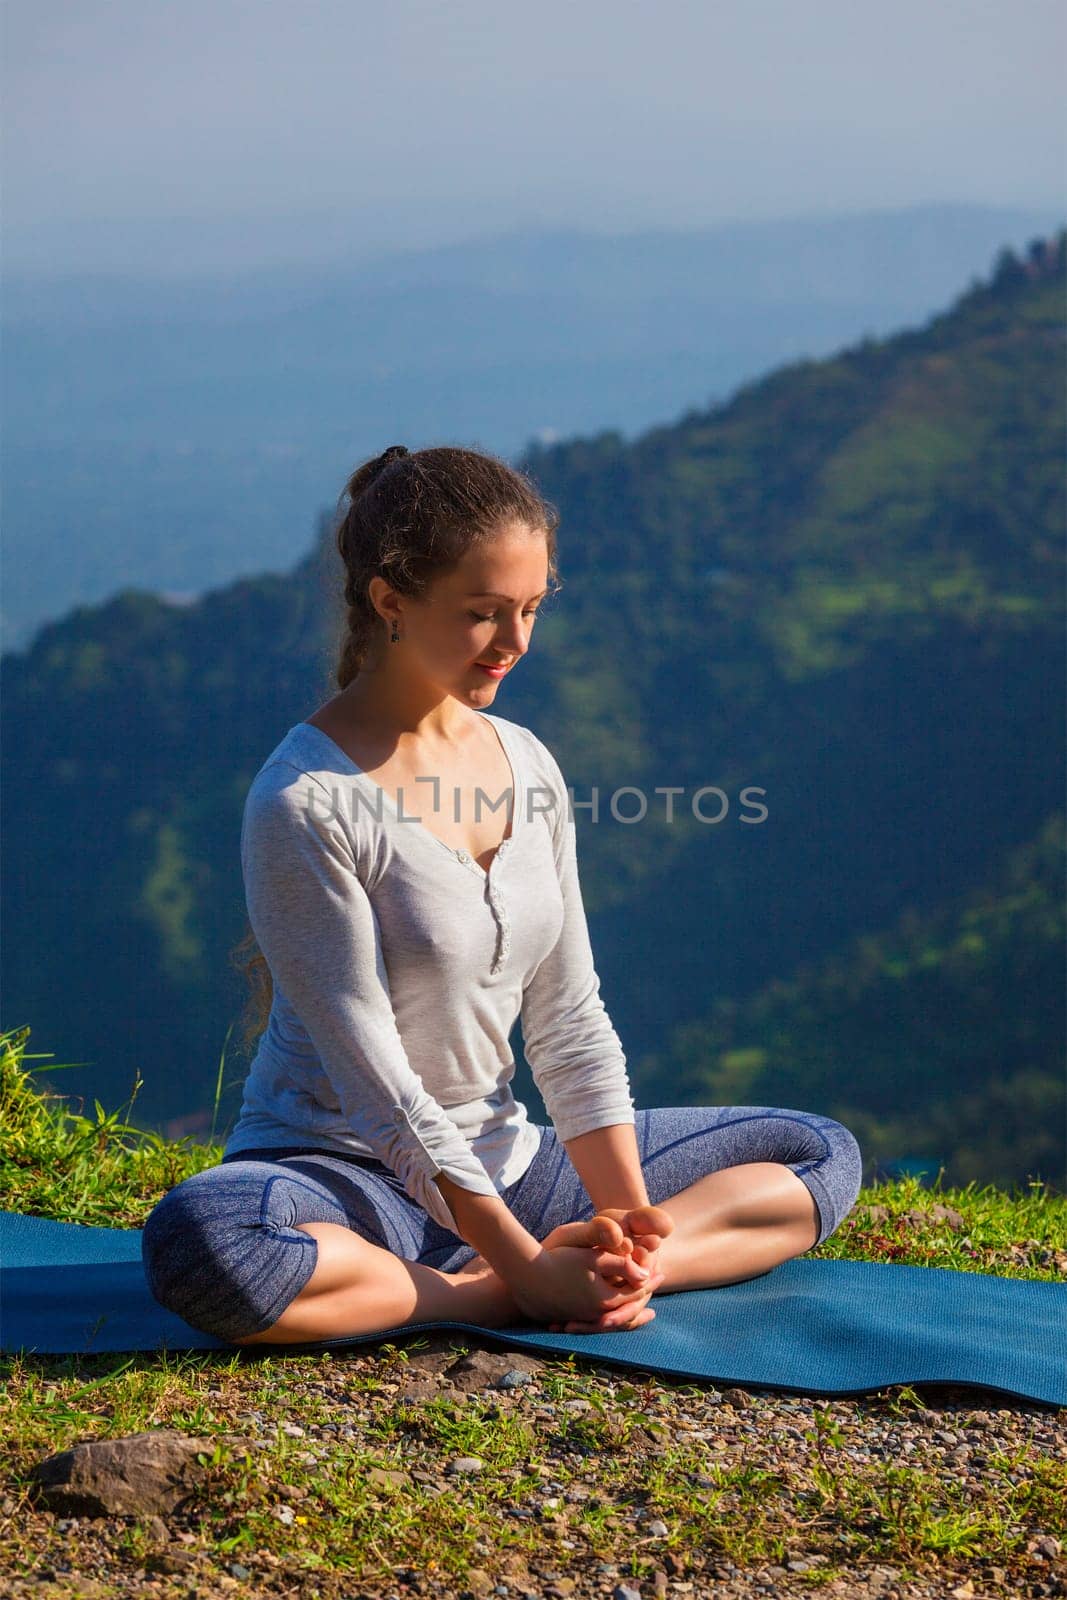 Sporty fit woman practices yoga asana Baddha Konasana - bound angle pose outdoors in HImalayas mountains in the morning with sky. Himachal Pradesh, India